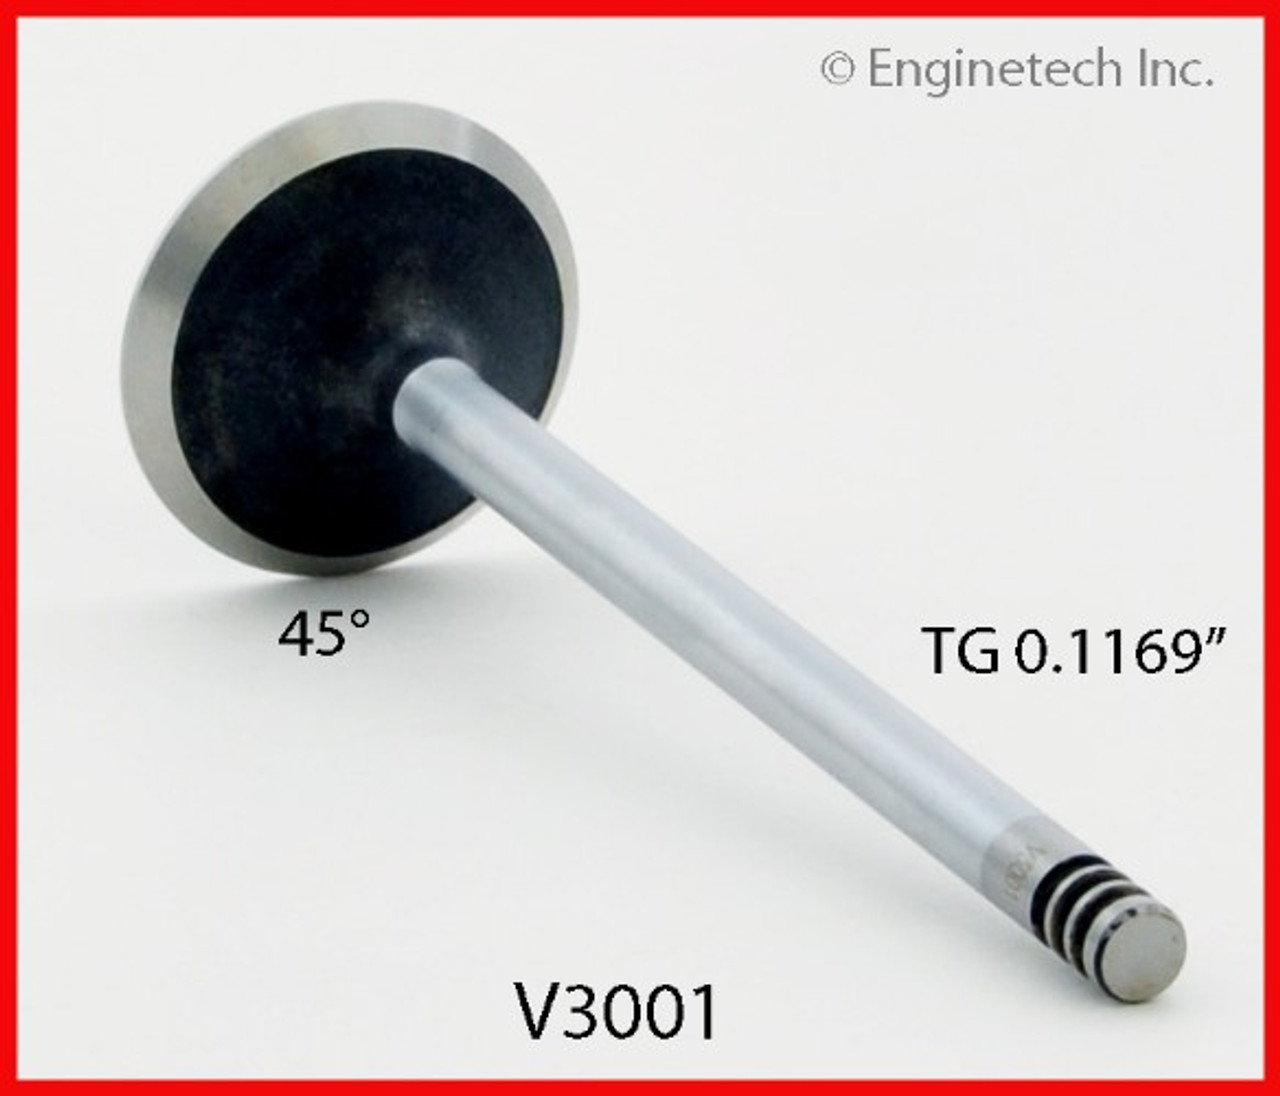 Exhaust Valve - 1999 Ford Mustang 3.8L (V3001.C23)